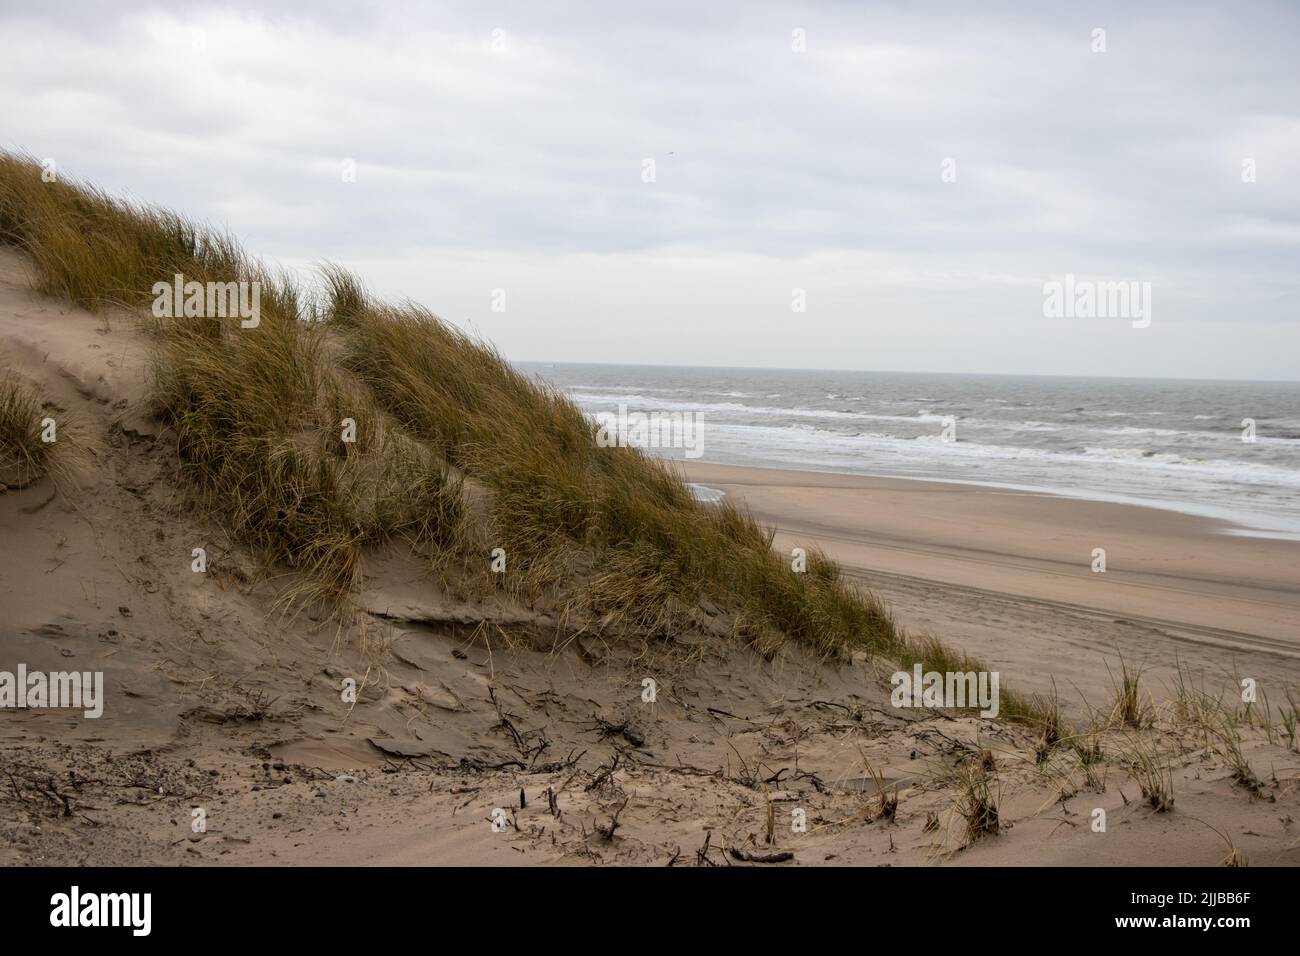 Beach in the Zuid-Kennemerland Nationaal park. Bloomingdaal an Zee. Stock Photo